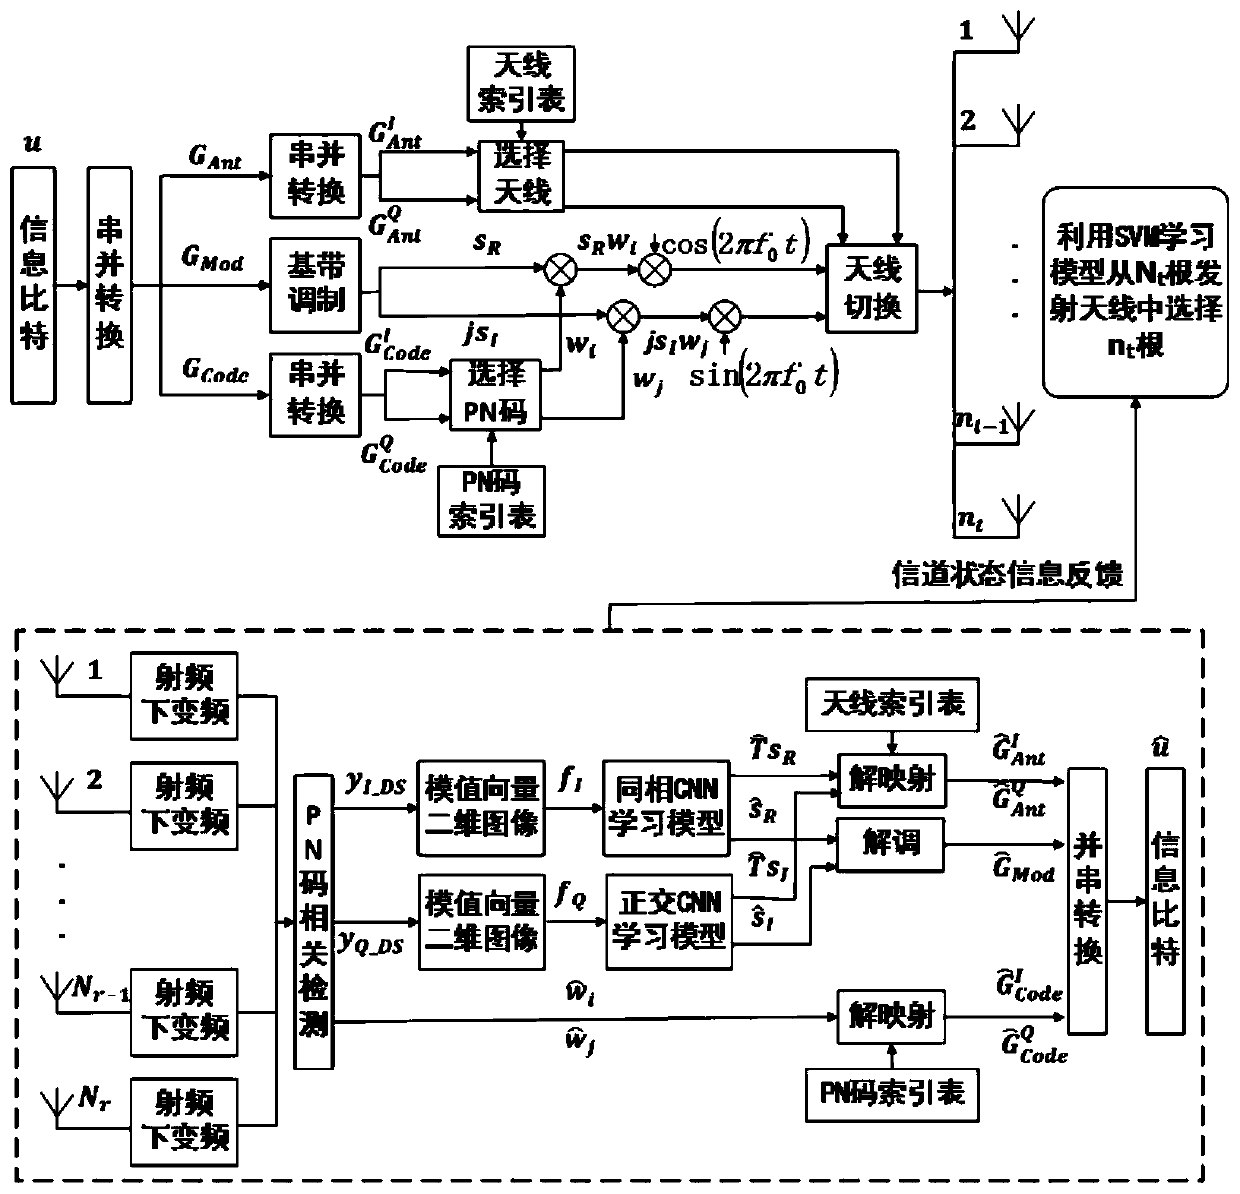 Two-dimensional vacant code index modulation method based on machine learning